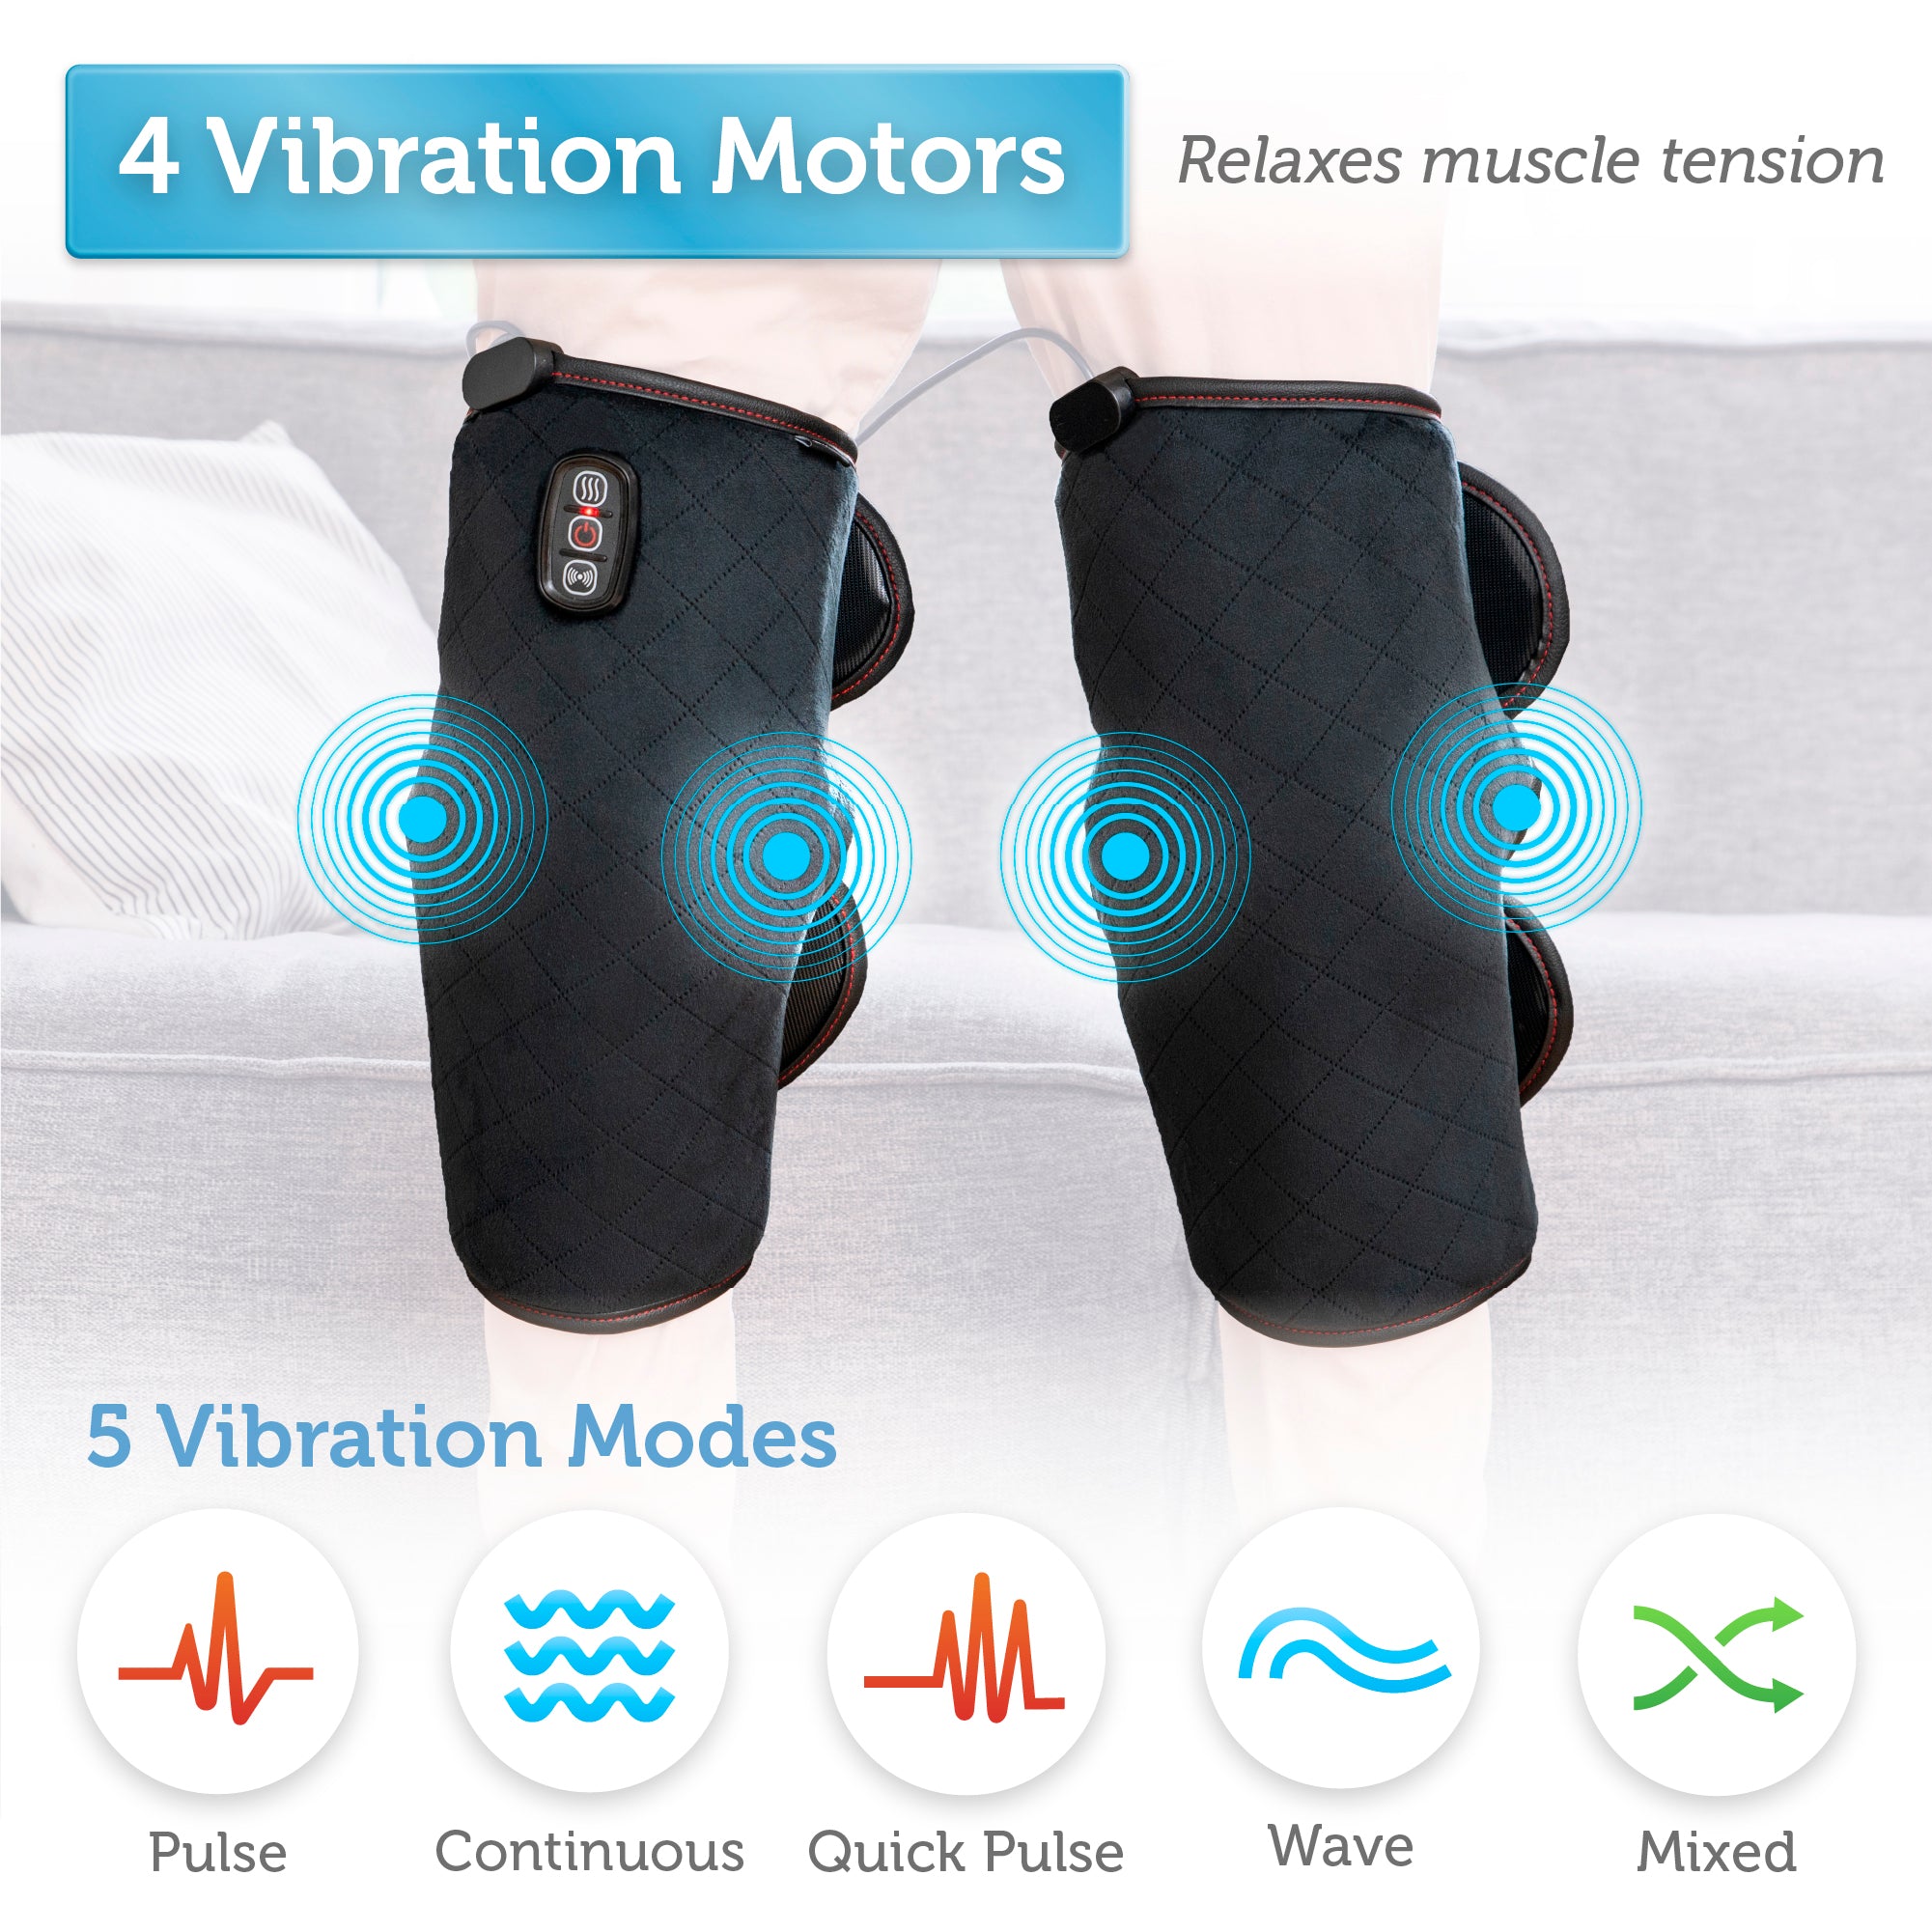 Comfier Knee Massager with Heat, Vibration Heating Pad for Knee, Knee Heating Pad for Relief, Leg Massager, Heated Knee Brace Wrap for Stress Relief